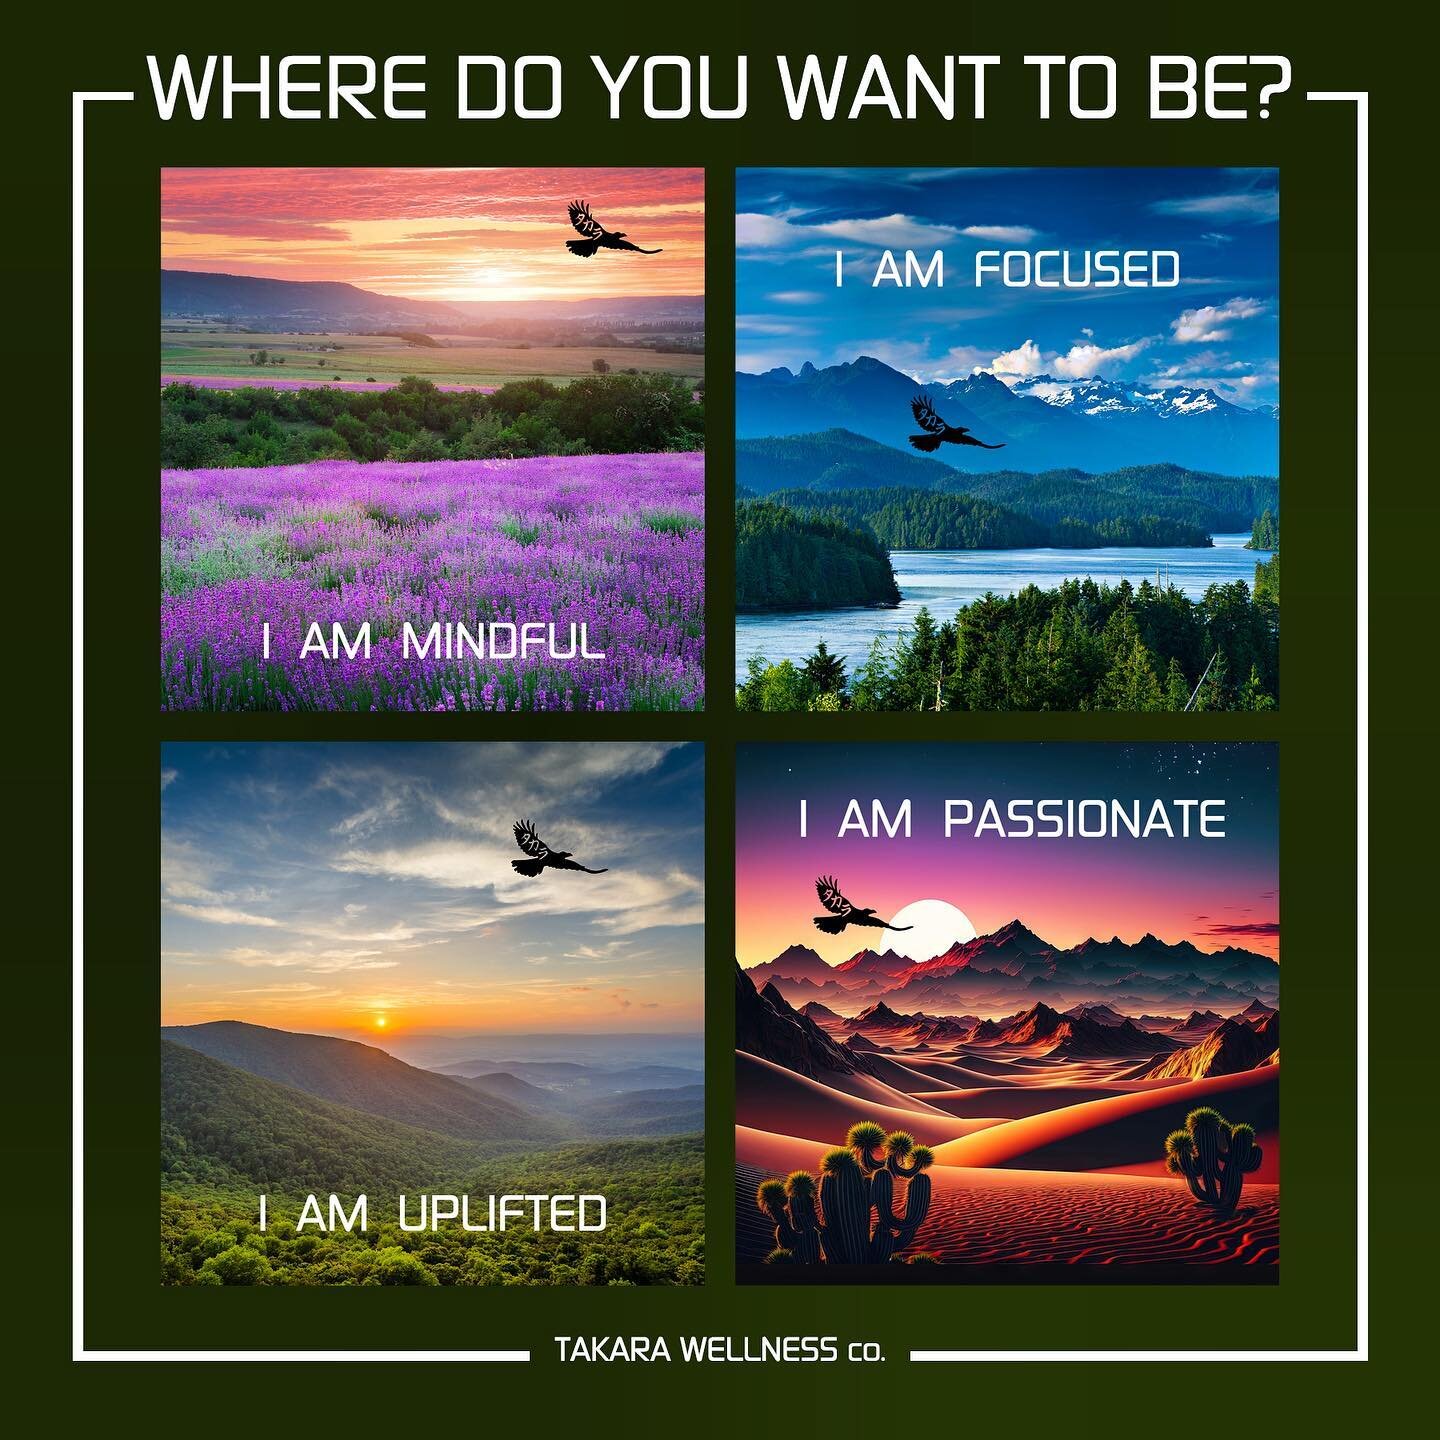 WHERE DO YOU WANT TO BE?

These images and/or phrases represent the intentions of some of my oil blends. If you find yourself wanting to be in one of these photos with the correlating phrase in mind&hellip; perhaps you should come try out that oil bl